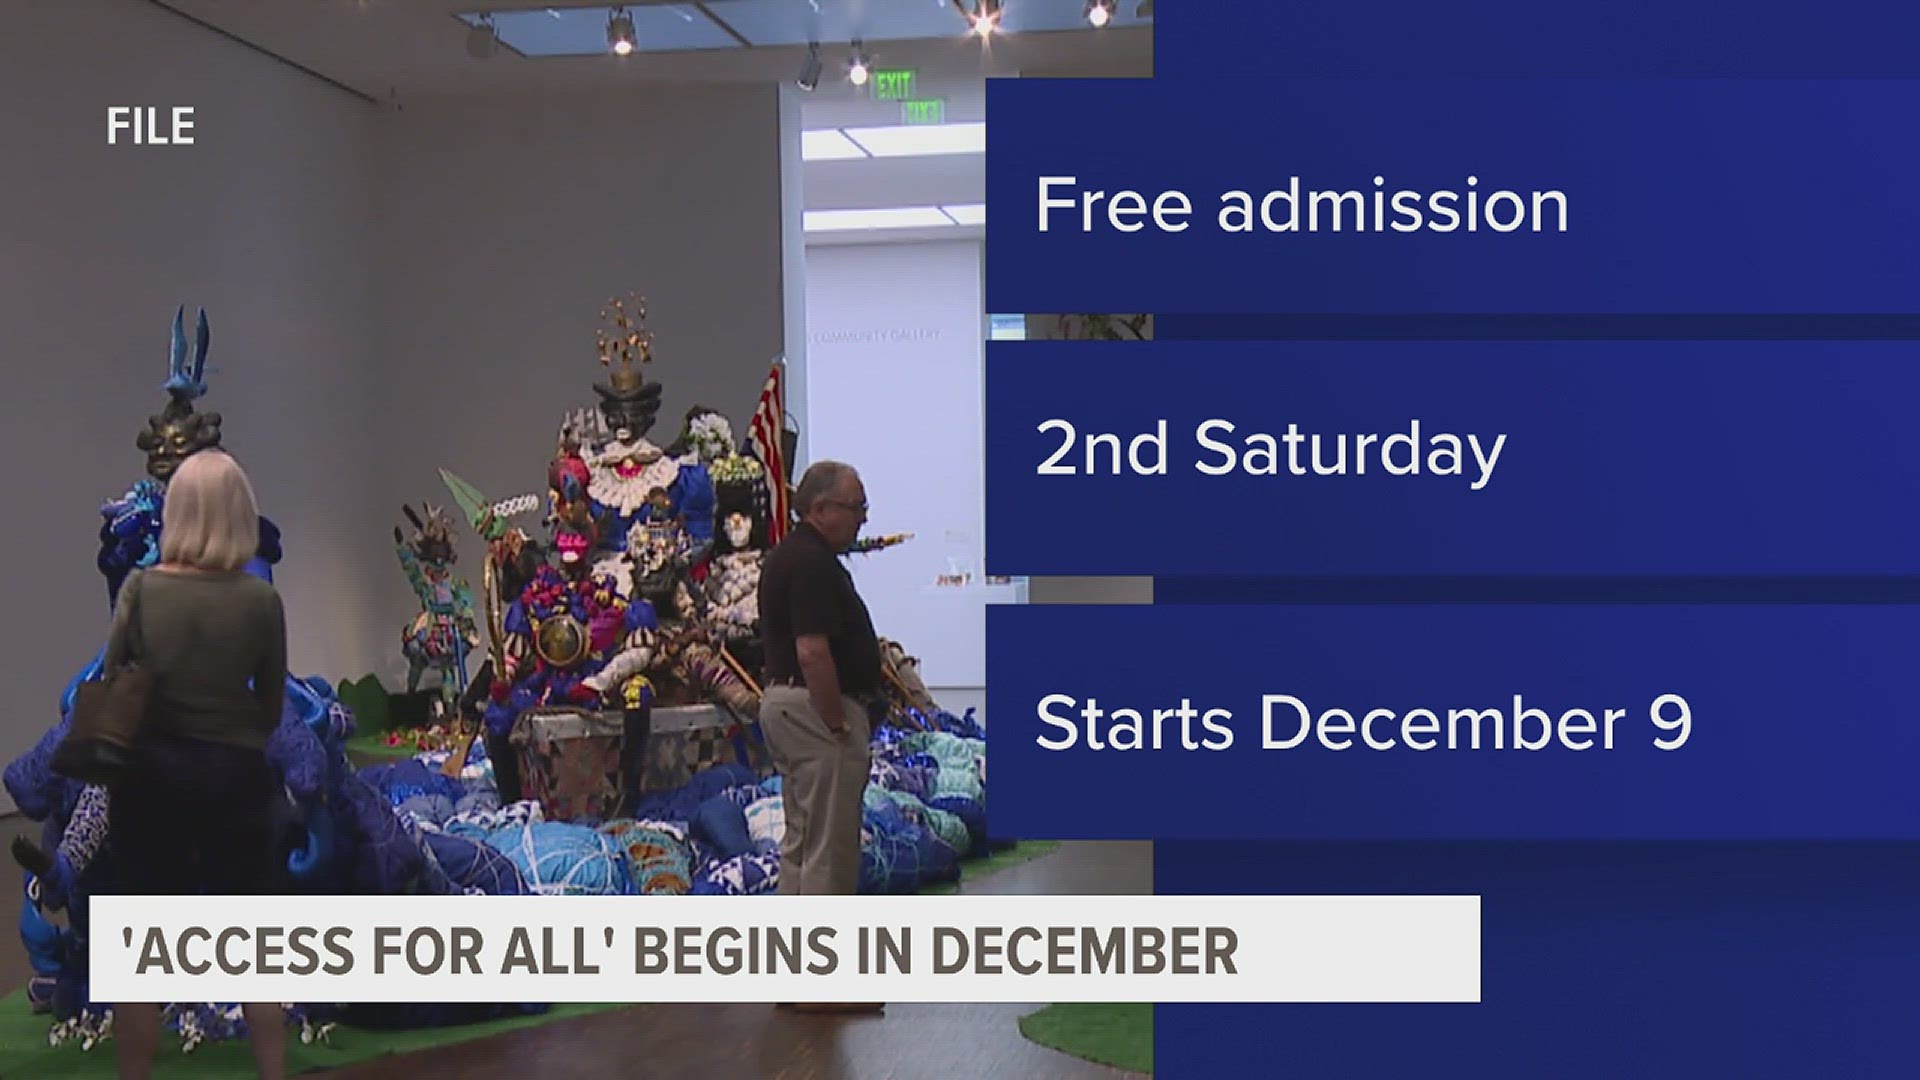 Beginning December 9th, the museum will not charge visitors on the second Saturday of every month.